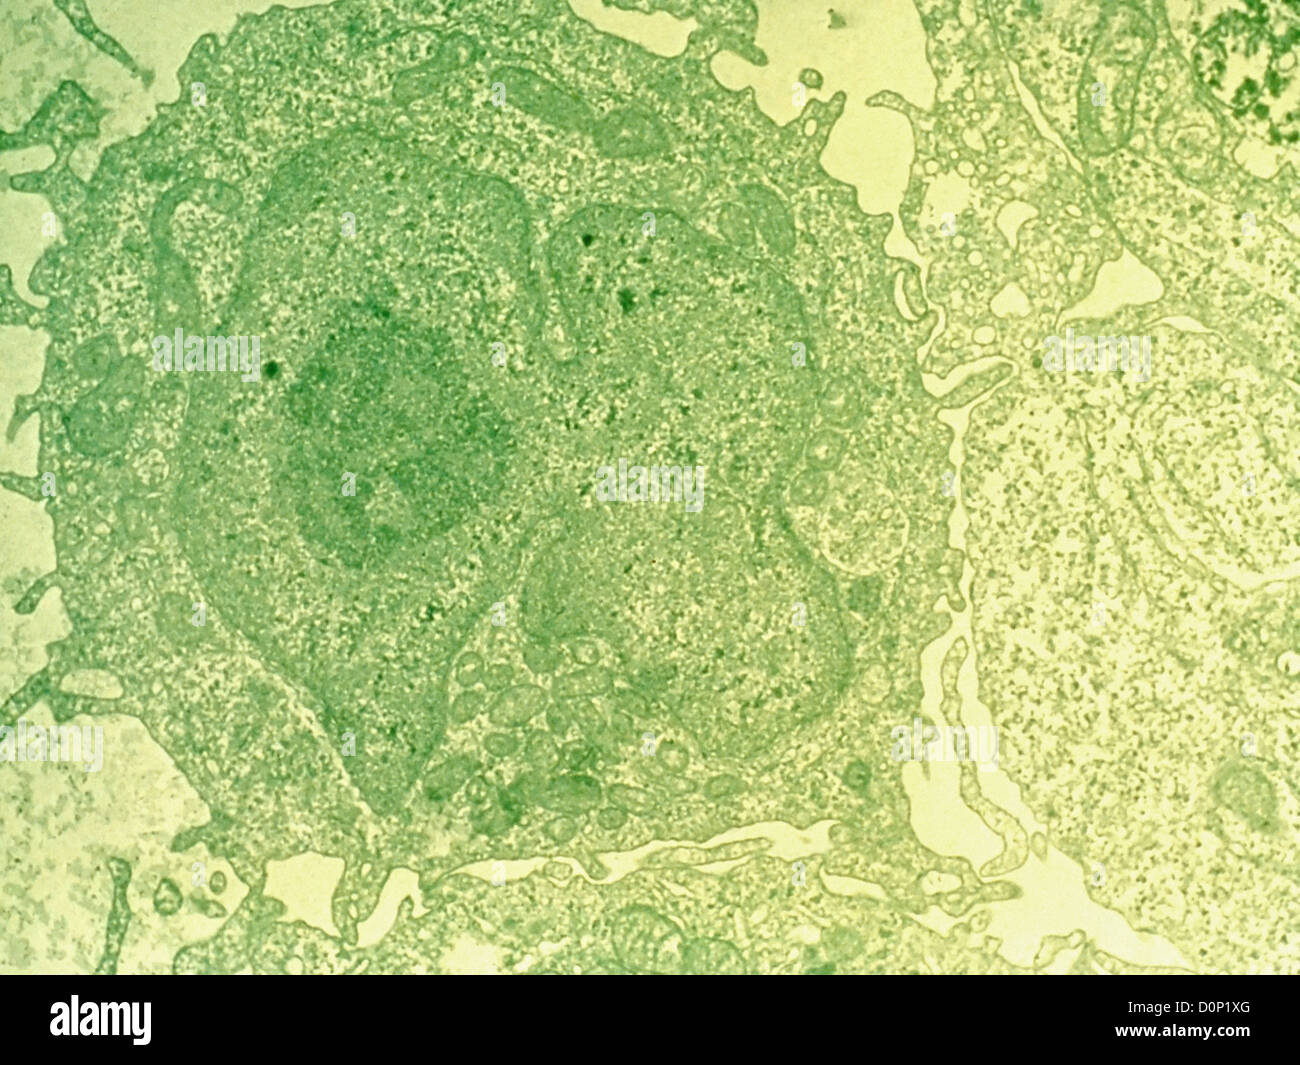 A histological slide of hairy cell leukemia. Stock Photo